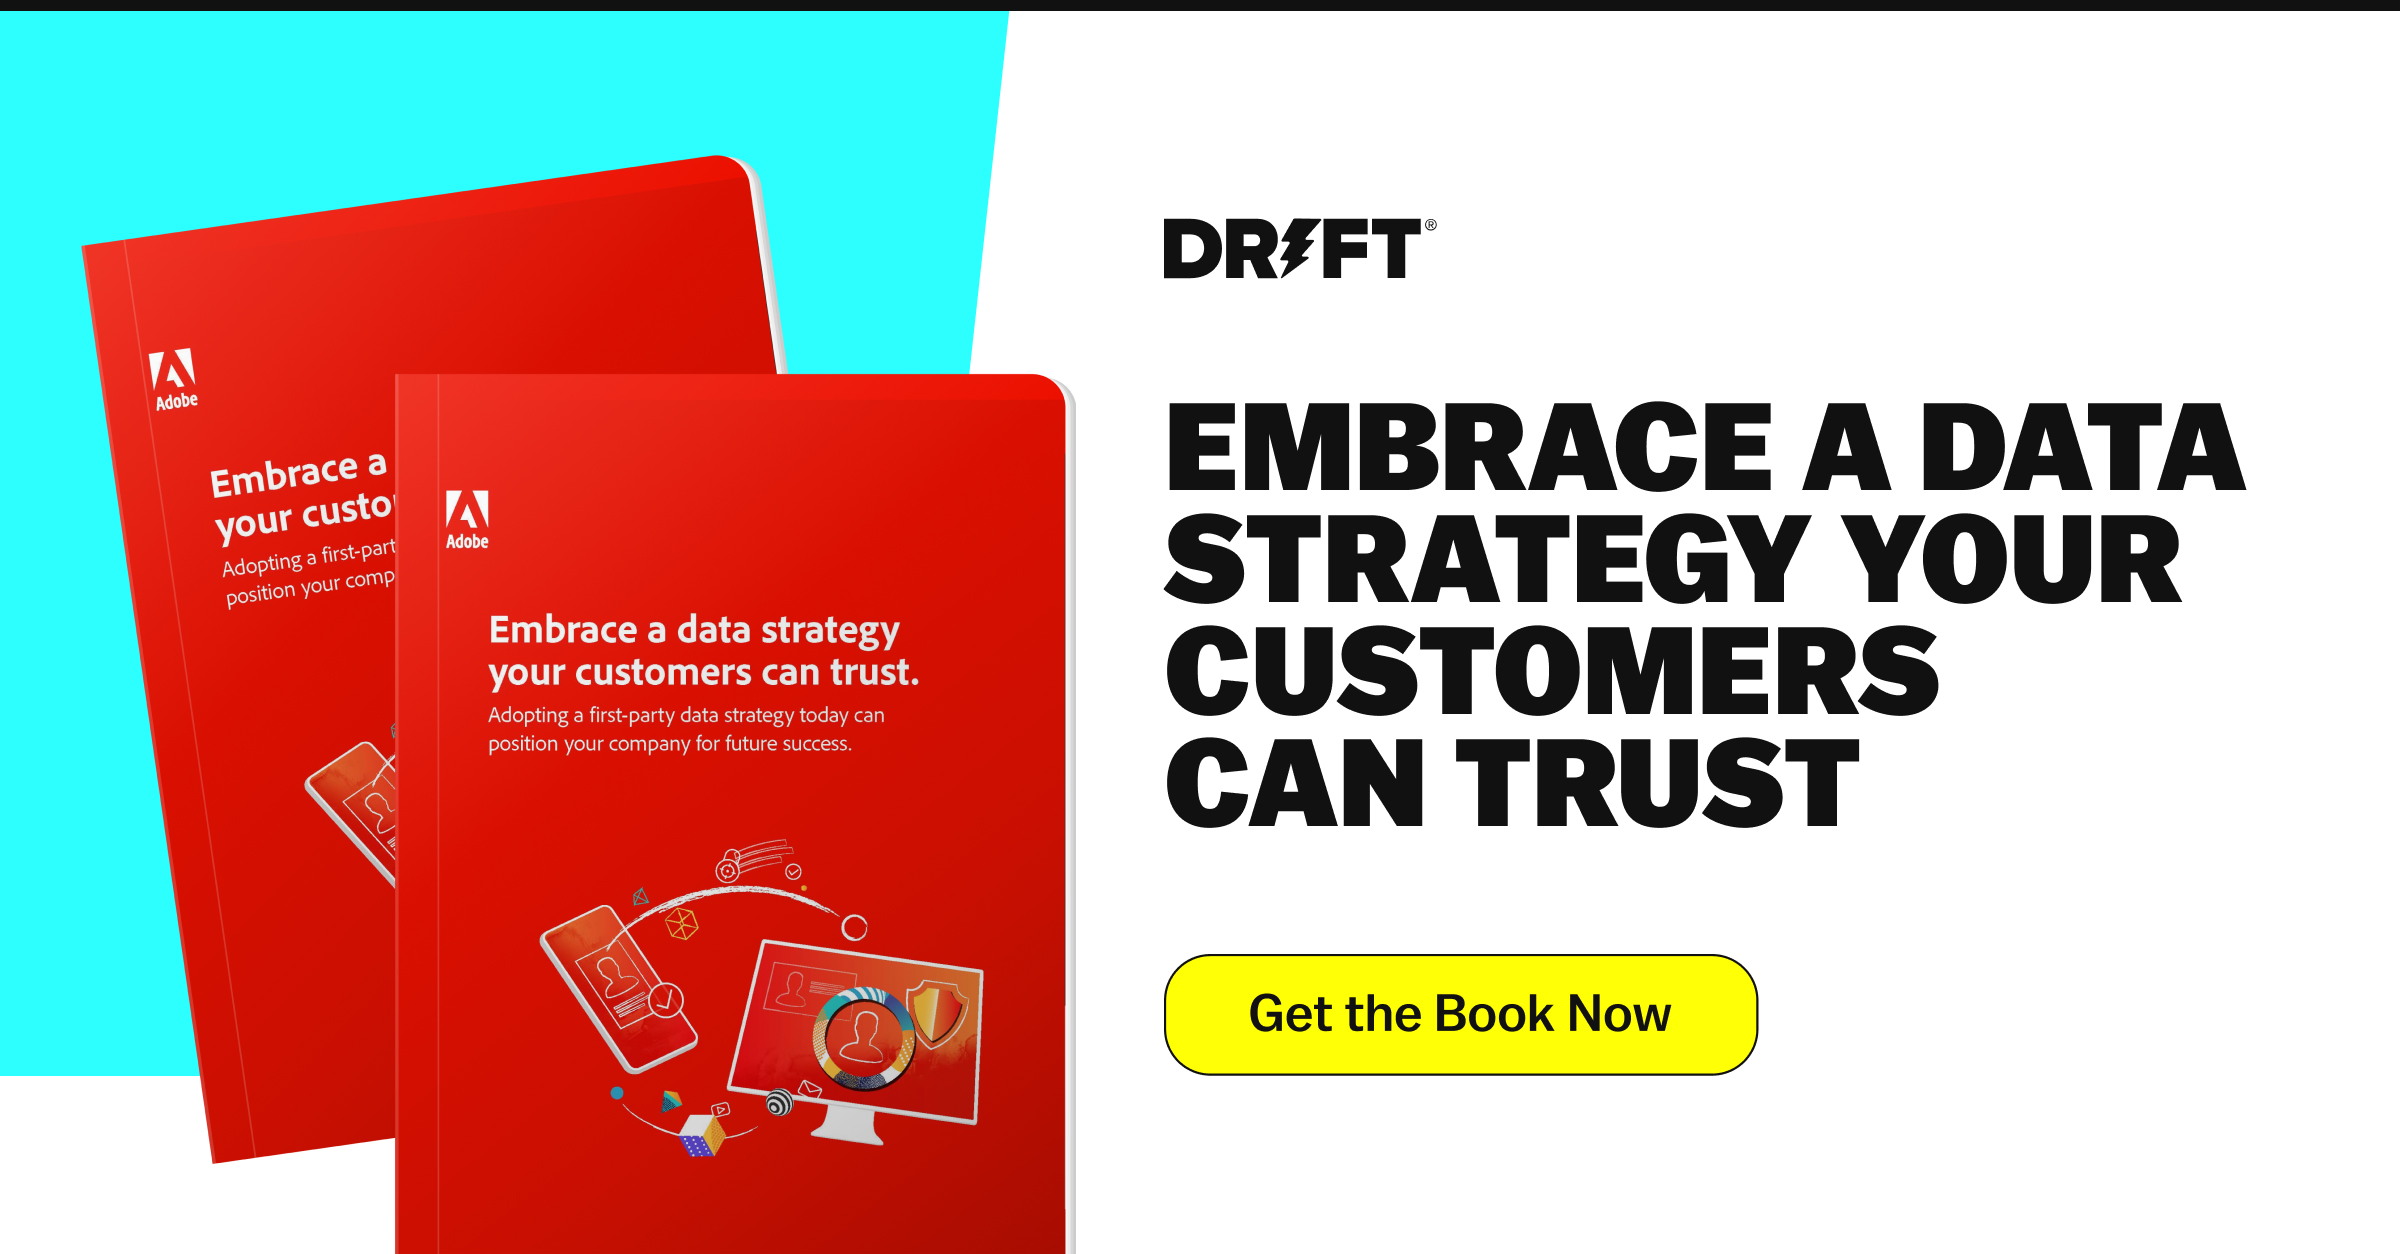 Embrace a data strategy your customers can trust.